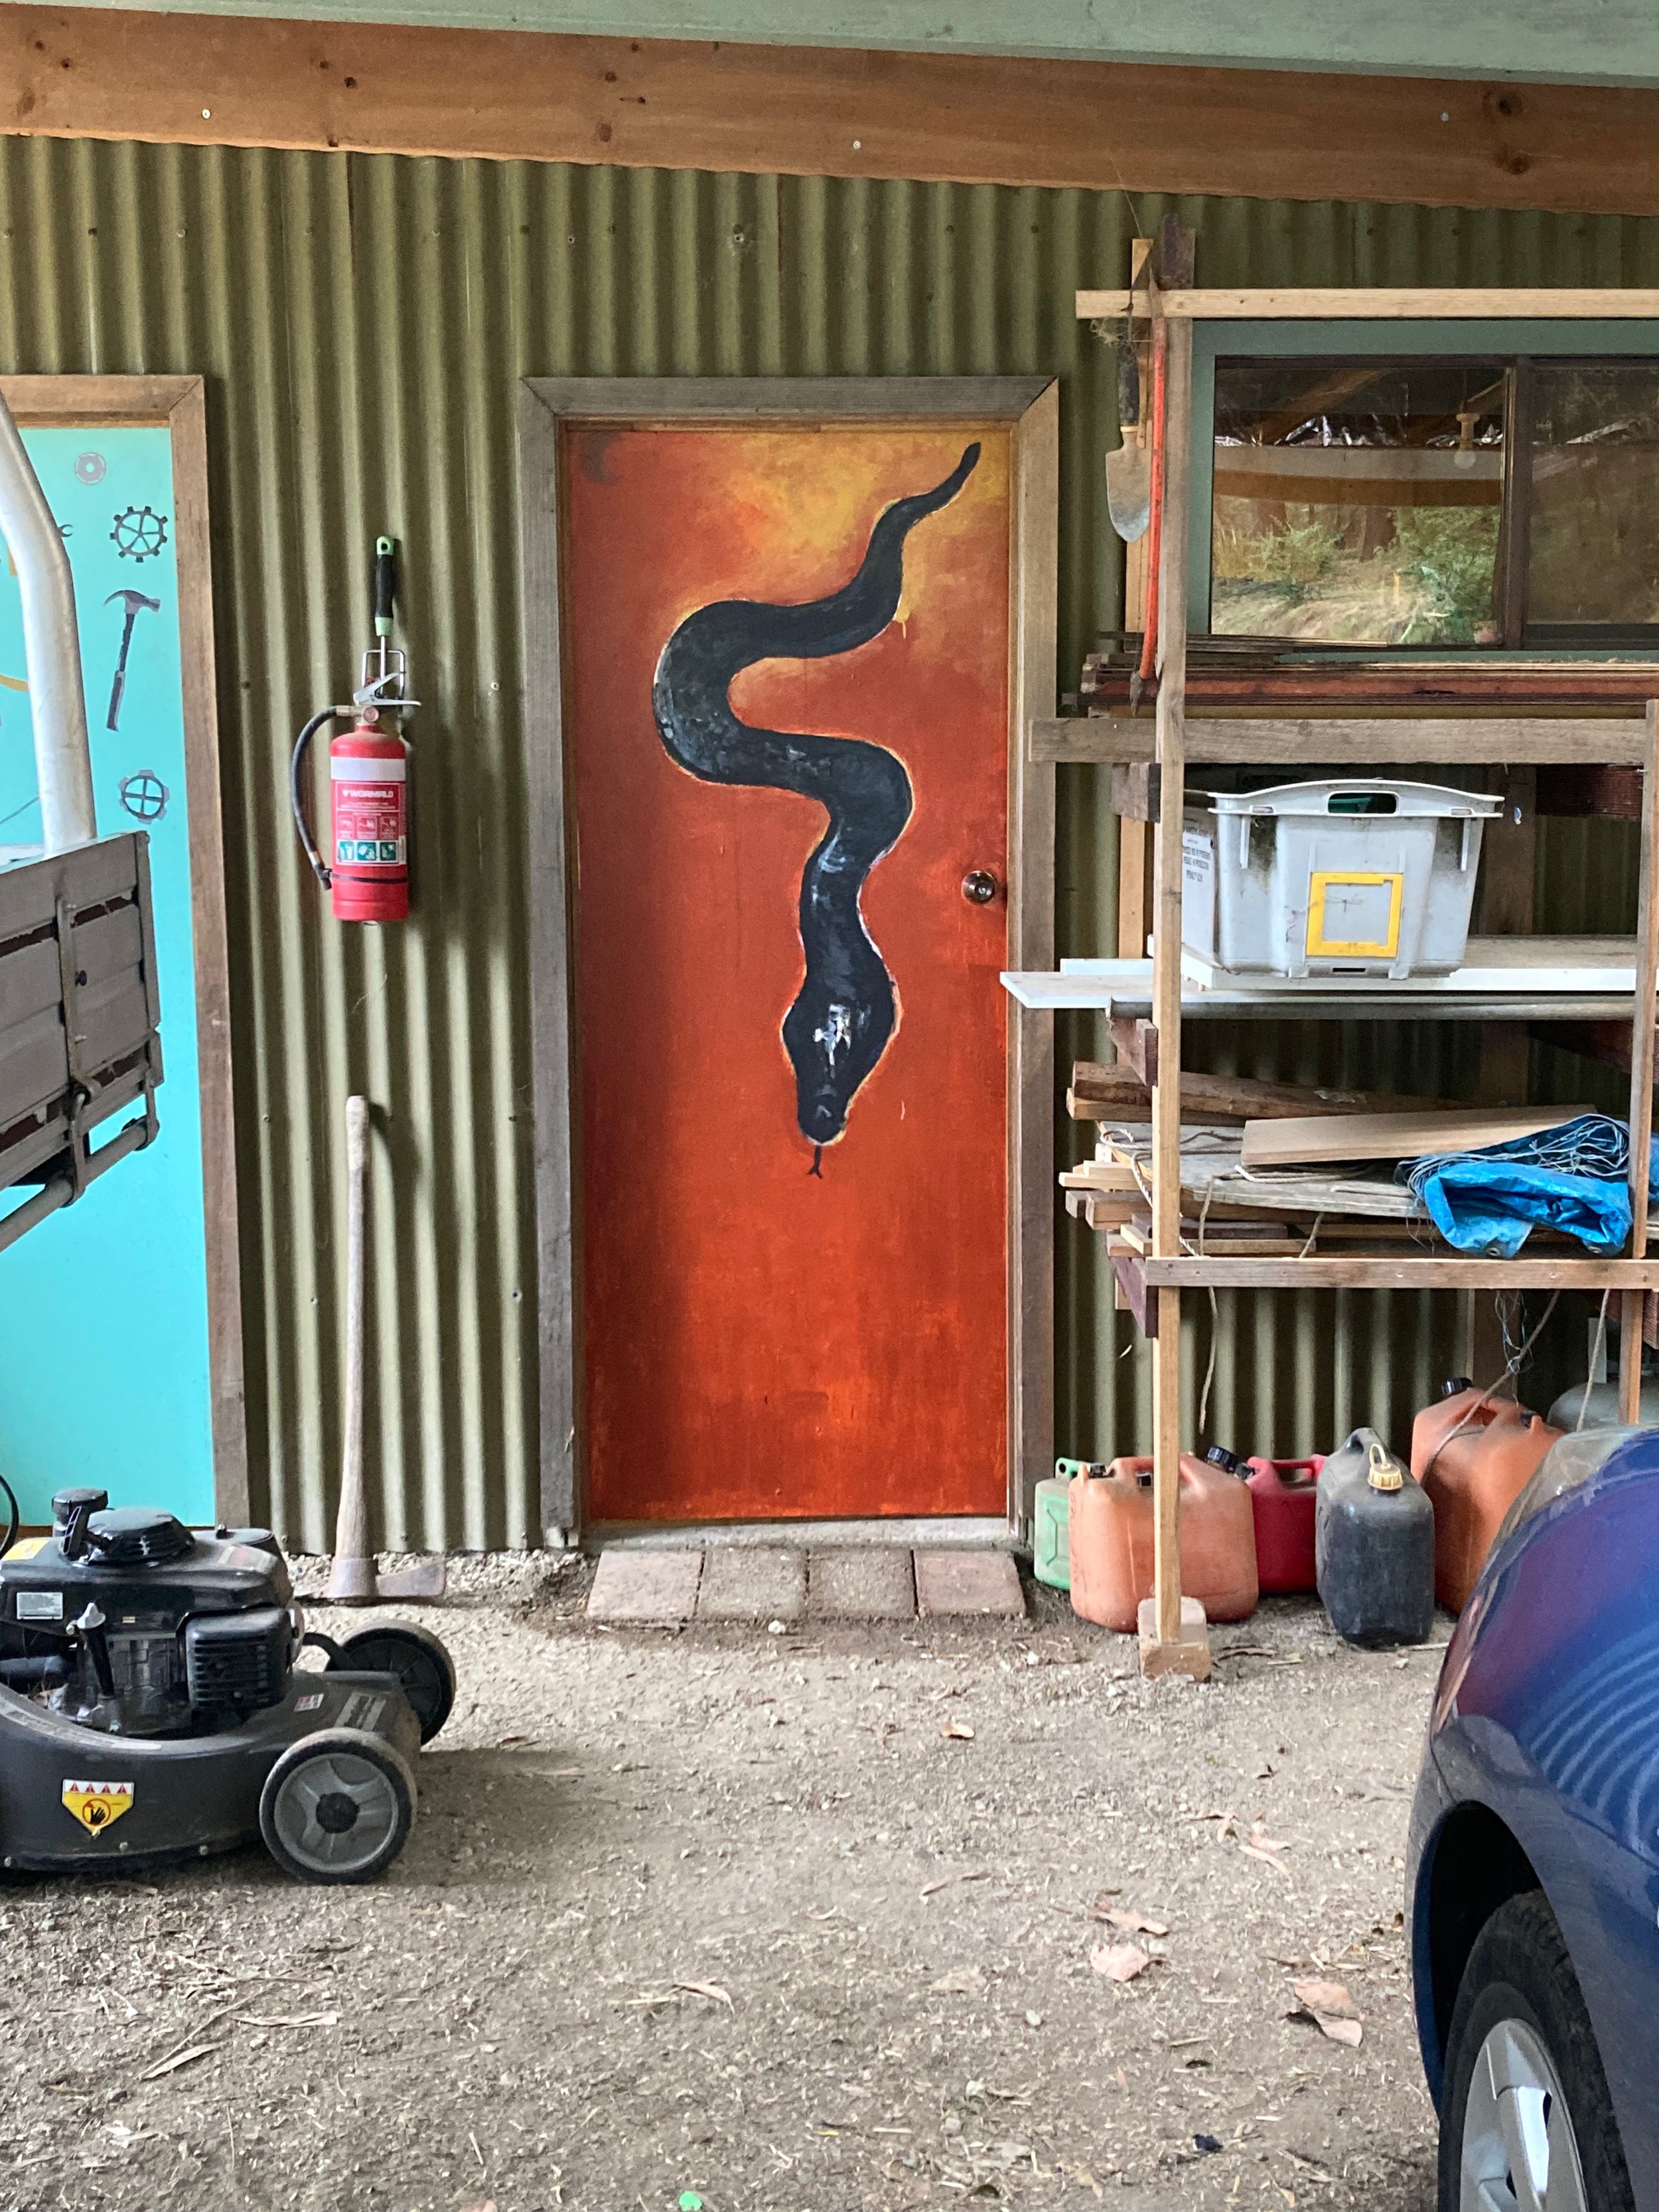 Shed door with painted black snake on bright orange background